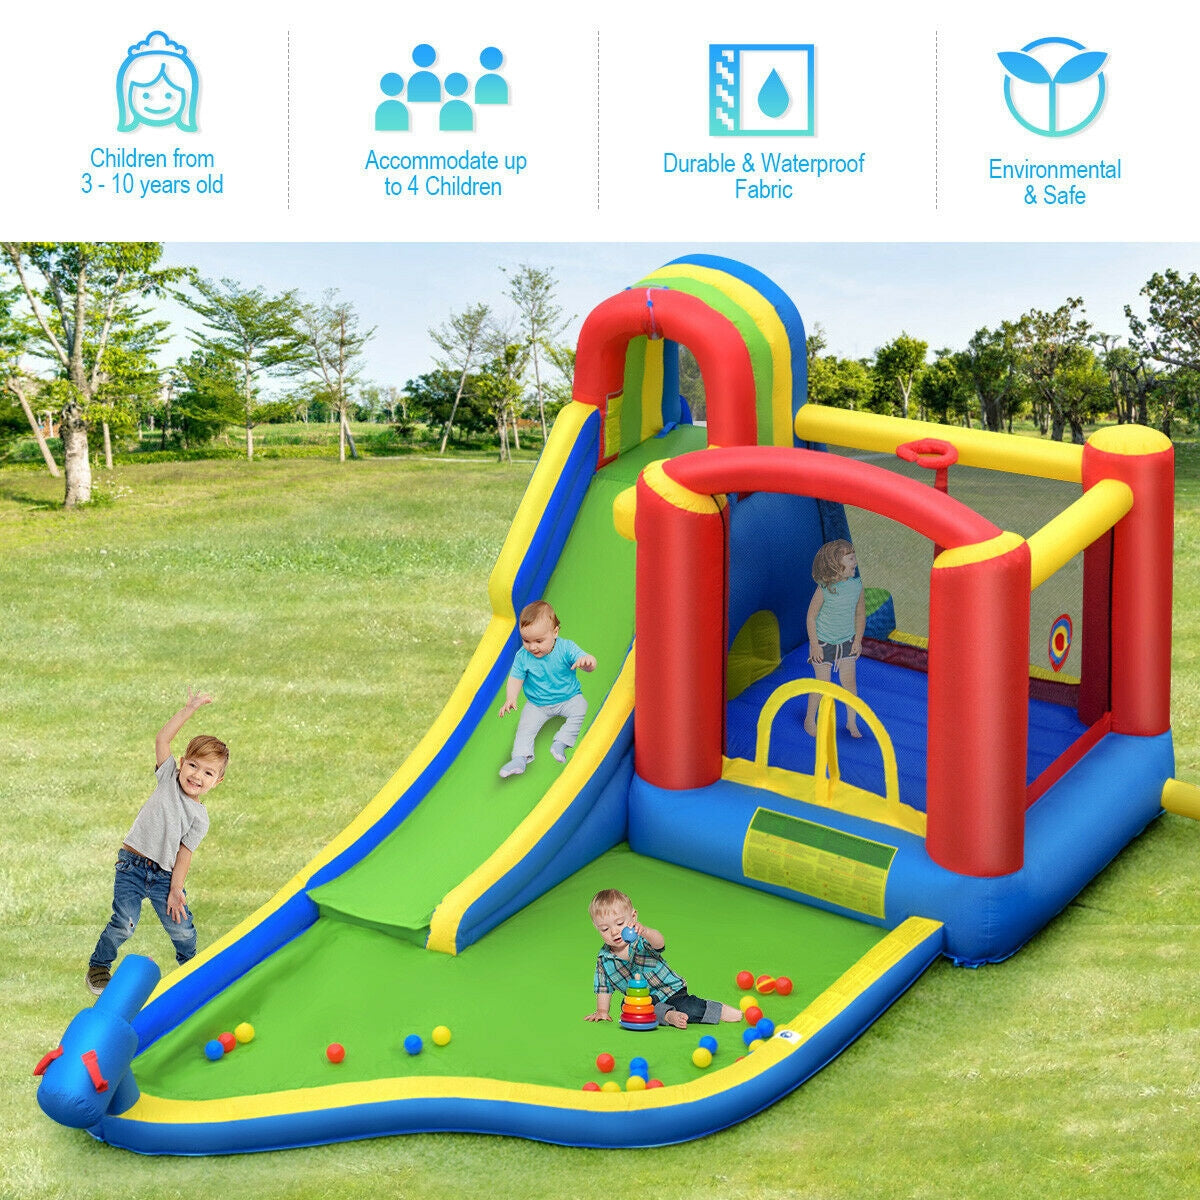 Exciting Party Experience for Up to 4 Children: With its spacious design, this inflatable castle can accommodate up to 4 children playing simultaneously. For safety reasons, we recommend that children playing on the bounce house should weigh less than 100 lbs and be within the height range of 3' to 5'. The total weight capacity of the inflatable bouncer is 400 lbs.